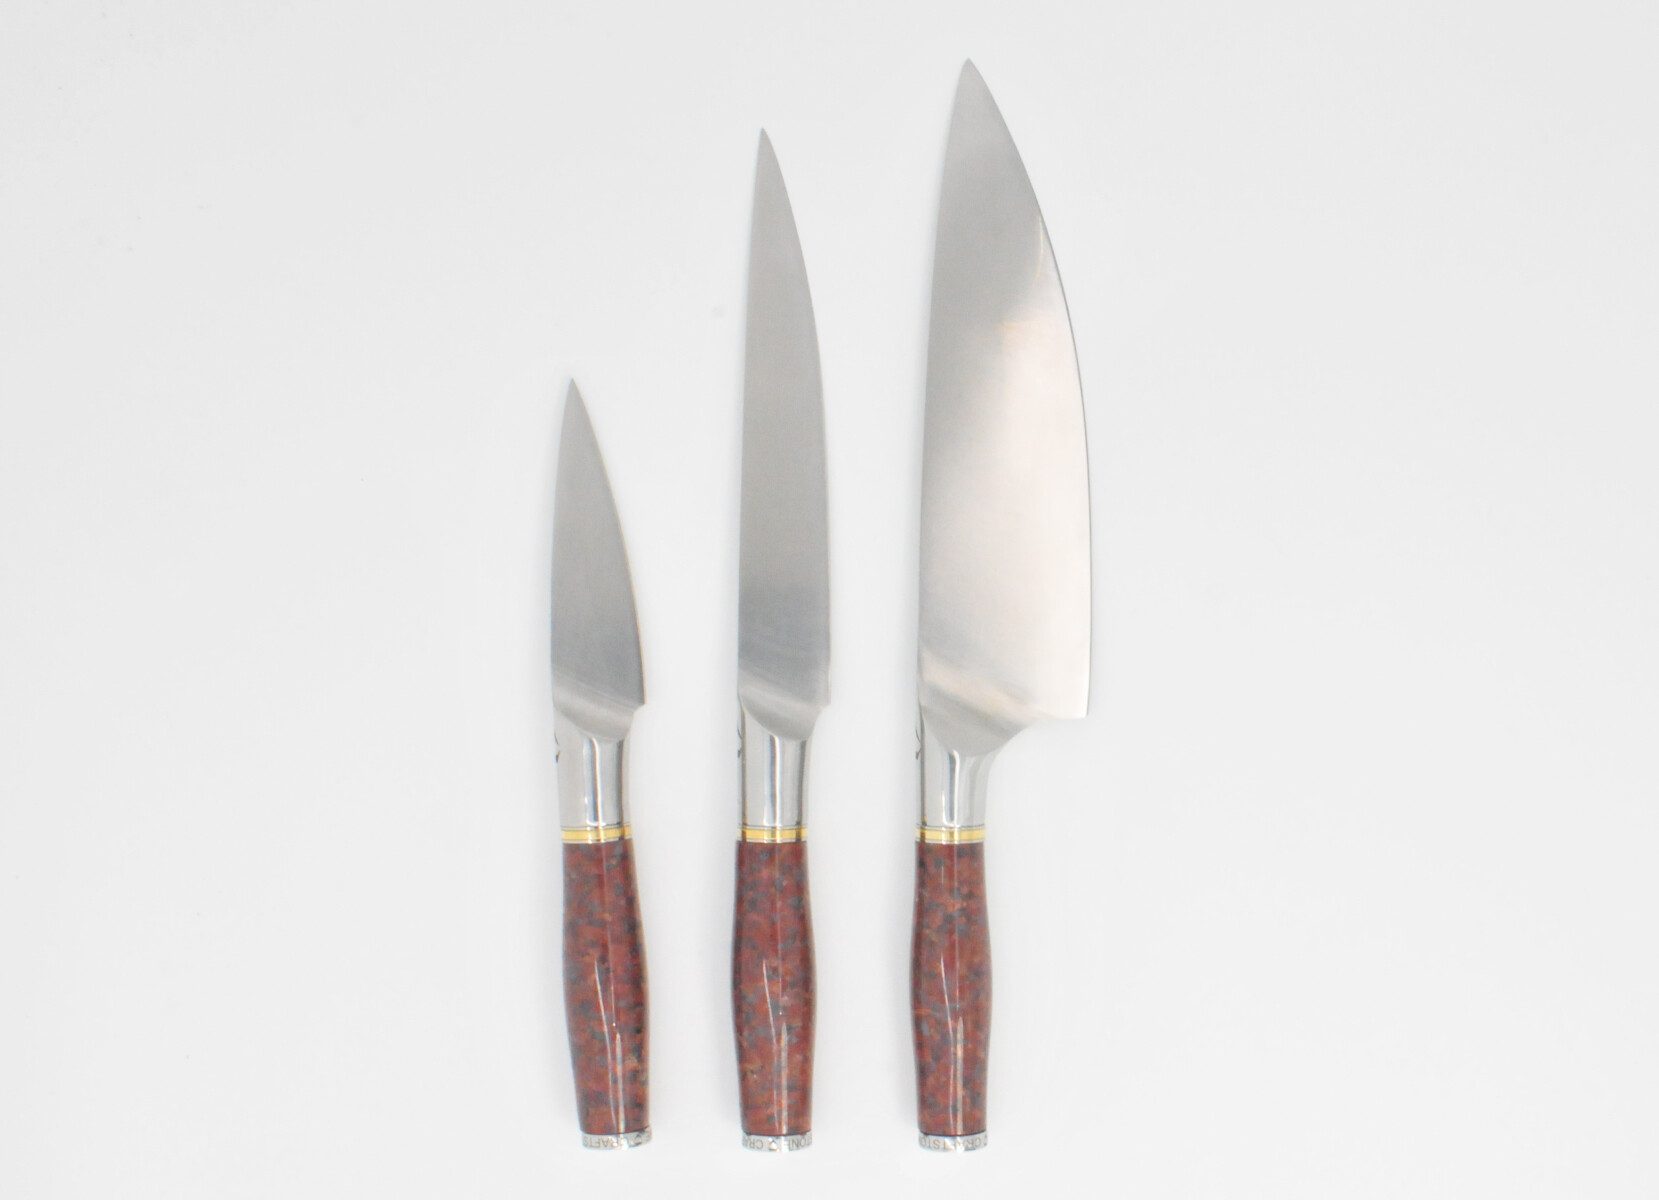 https://www.craftstoneknives.com/wp-content/uploads/bfi_thumb/3-Knife-Set-with-a-Red-Granite-Handle-a-Garnet-Colored-Cubic-Zirconia-Stone-at-the-Back-of-the-Knife-and-Brass-and-Stainless-Steel-Decorative-Rings-3jbc5rcoyu28ygk72i287e.jpg